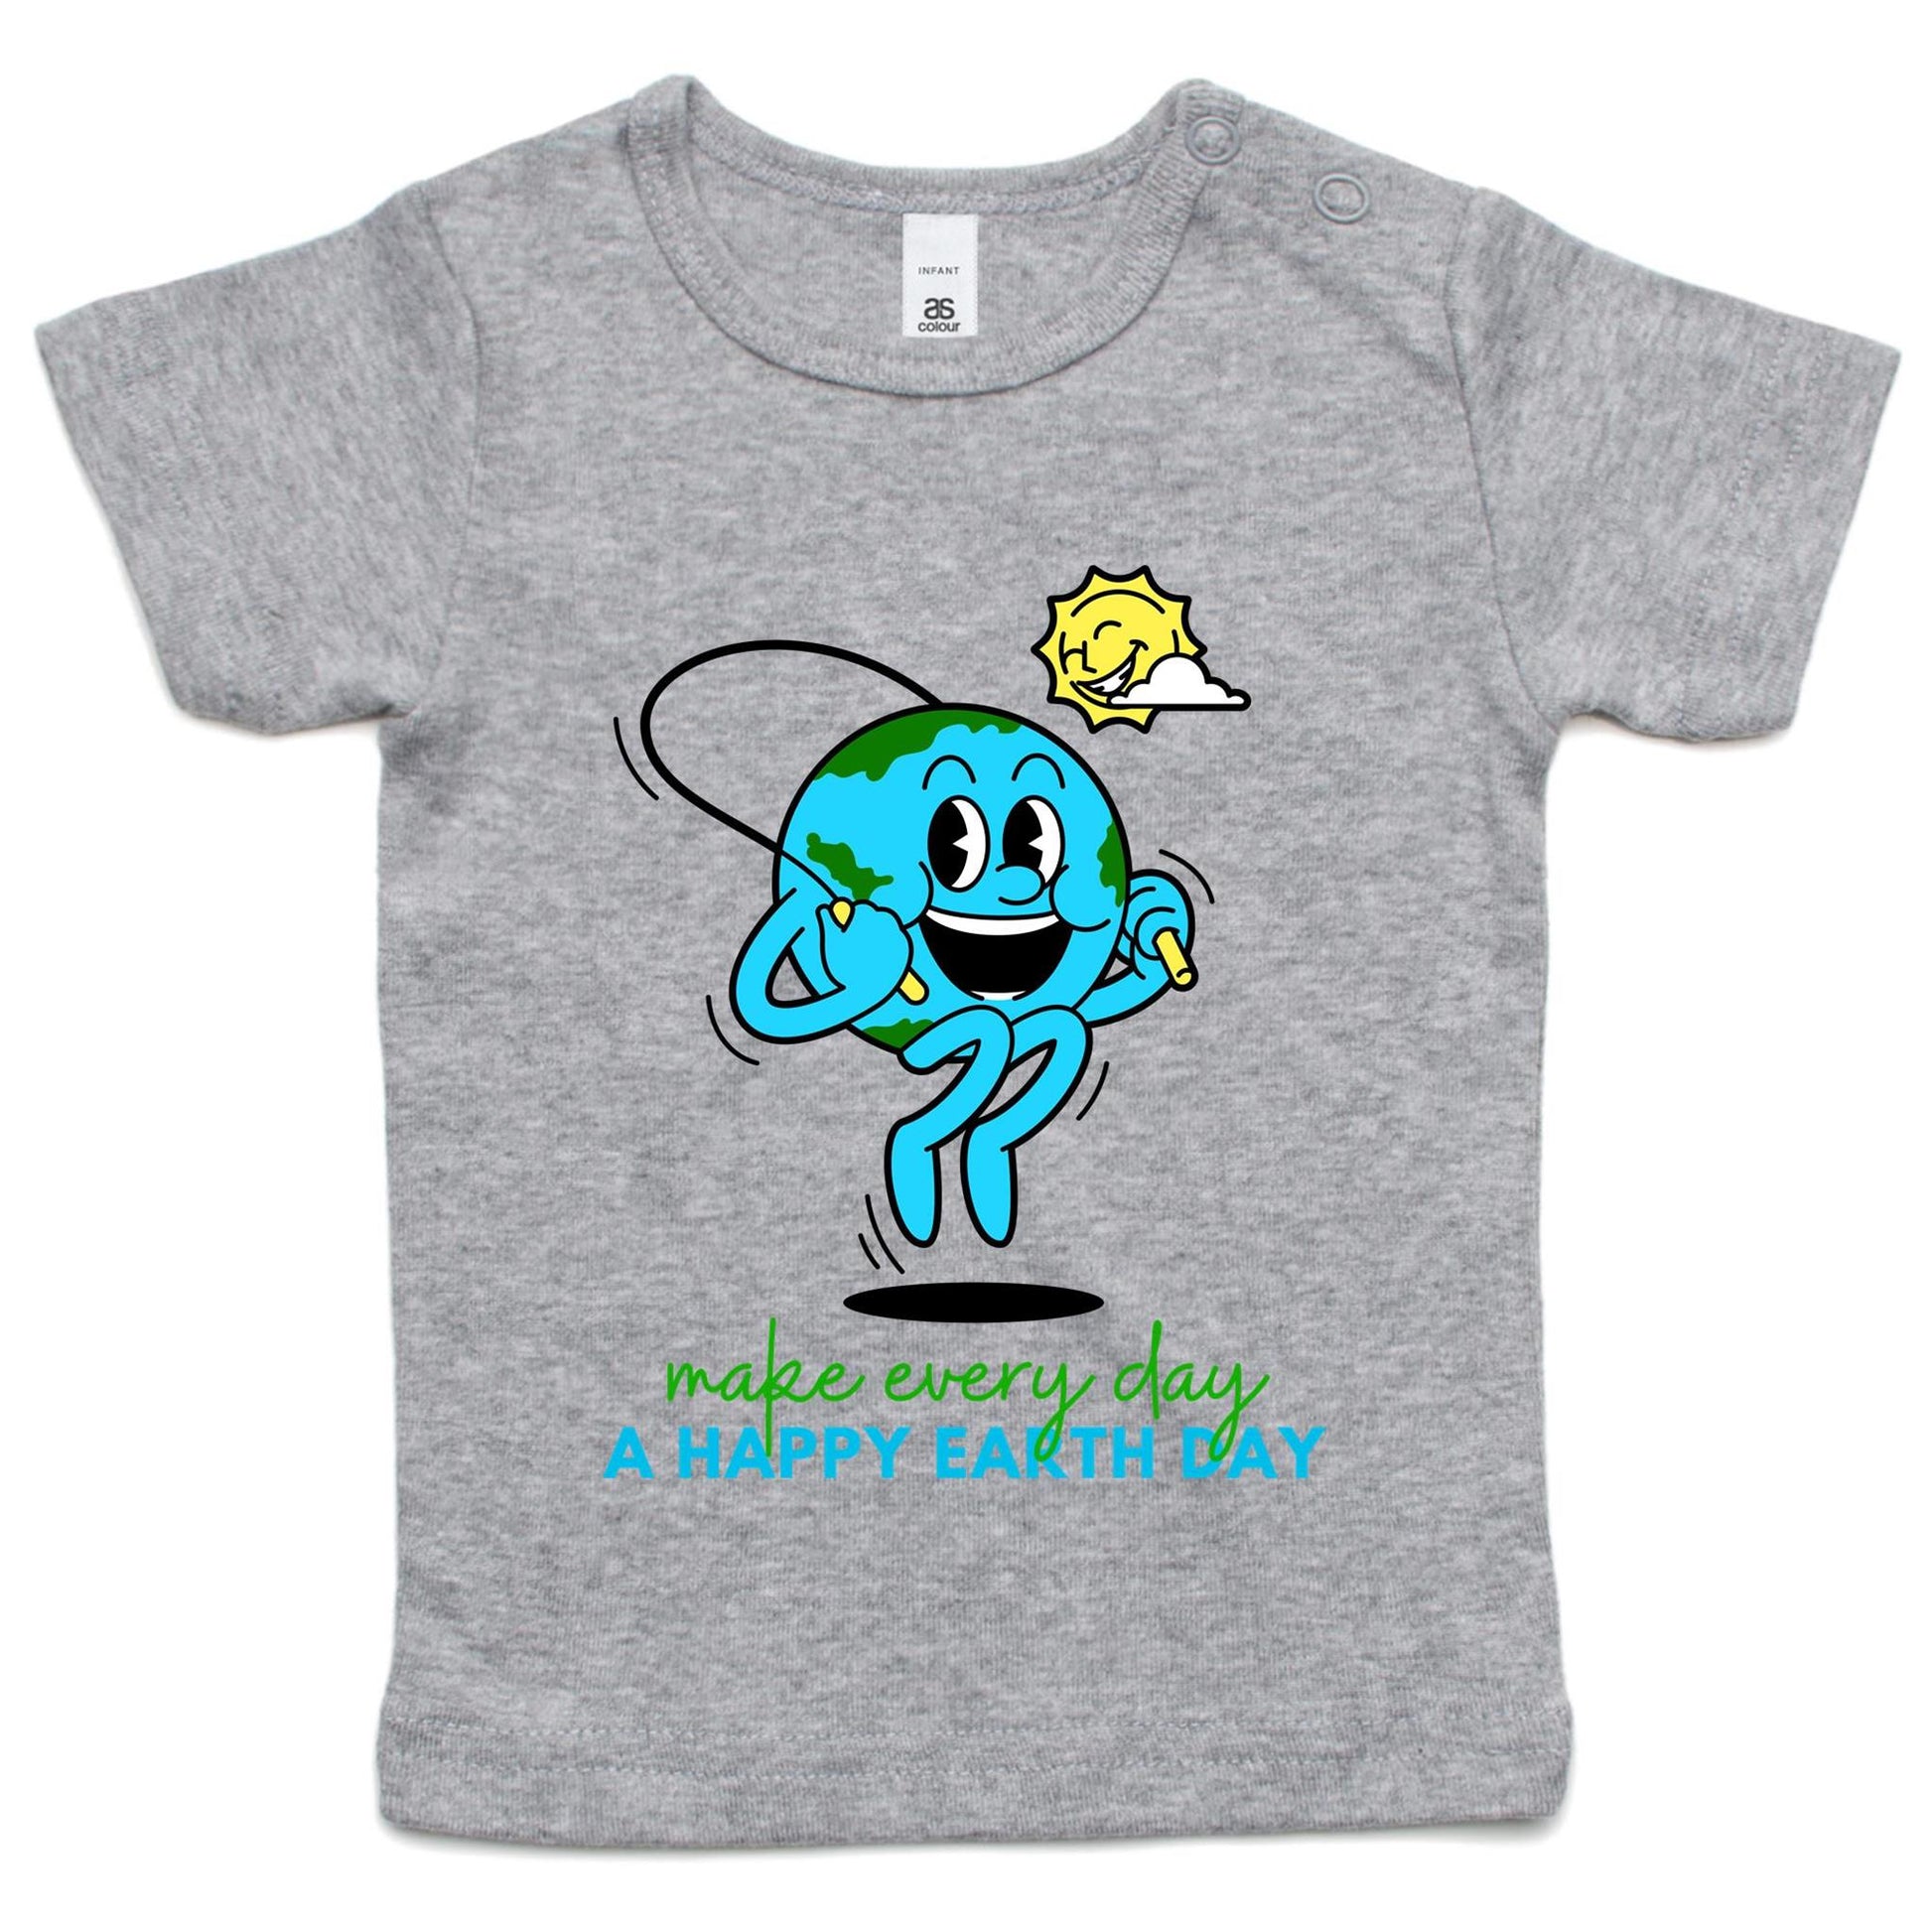 Make Every Day A Happy Earth Day - Baby T-shirt Grey Marle Baby T-shirt Environment